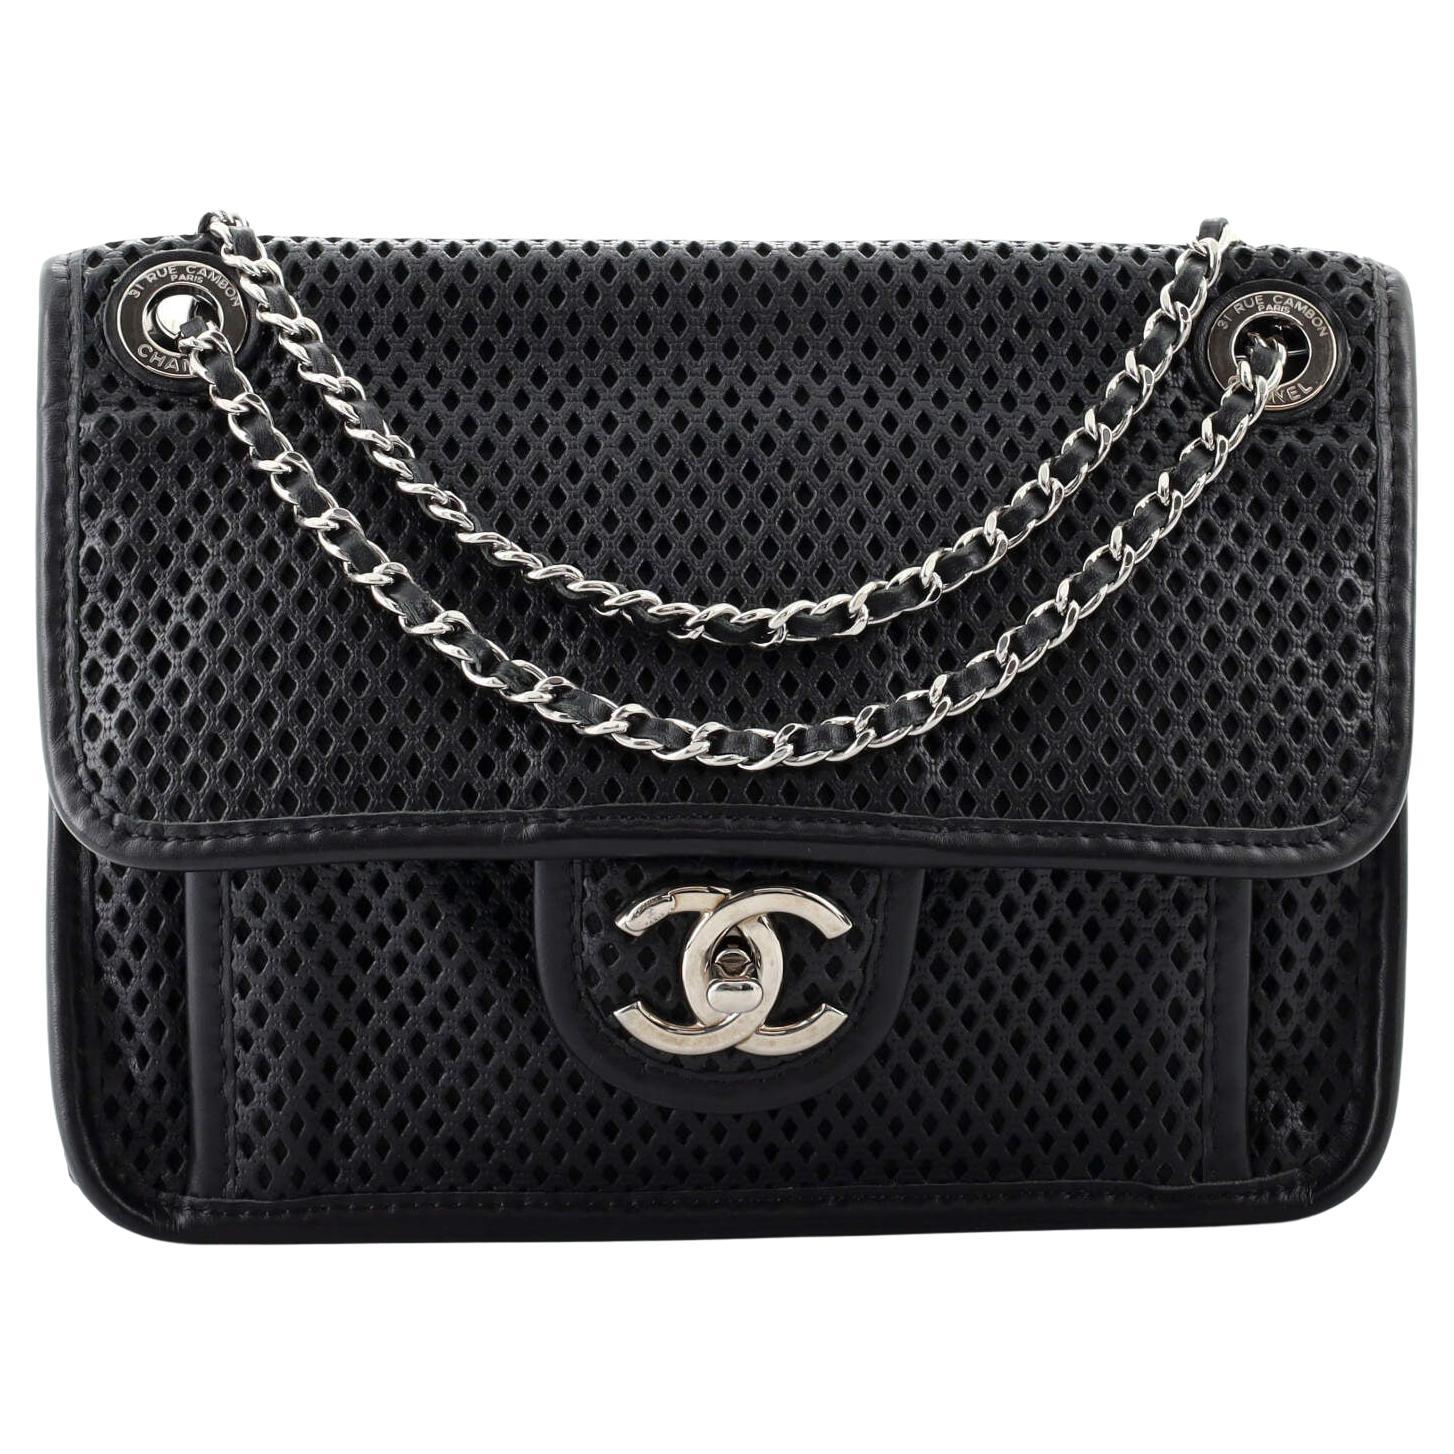 Chanel Up In The Air Flap Bag Perforated Leather Small